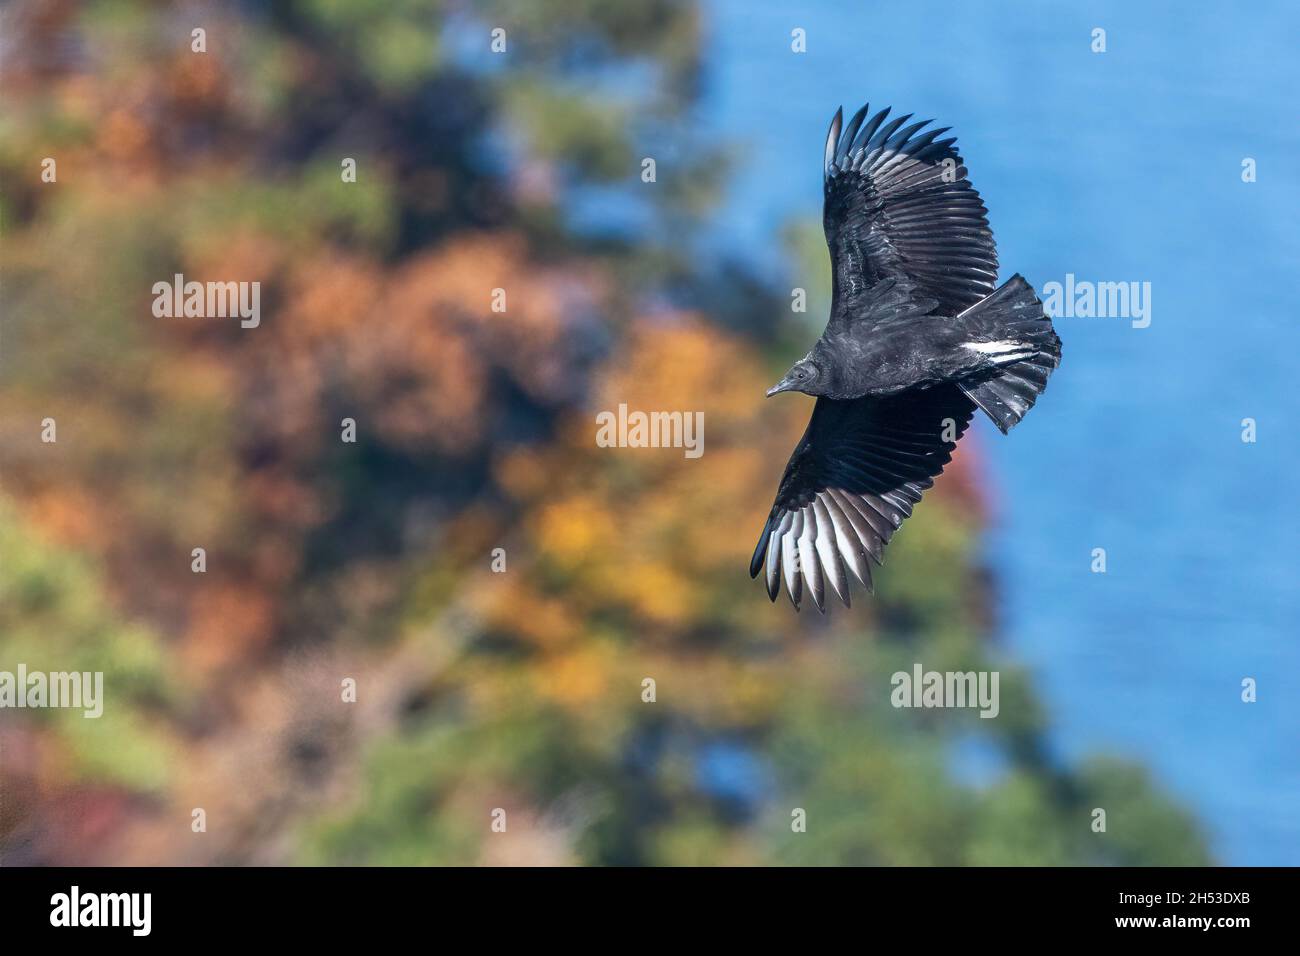 Black vulture in flight at Palisades State Park, New Jersey Stock Photo